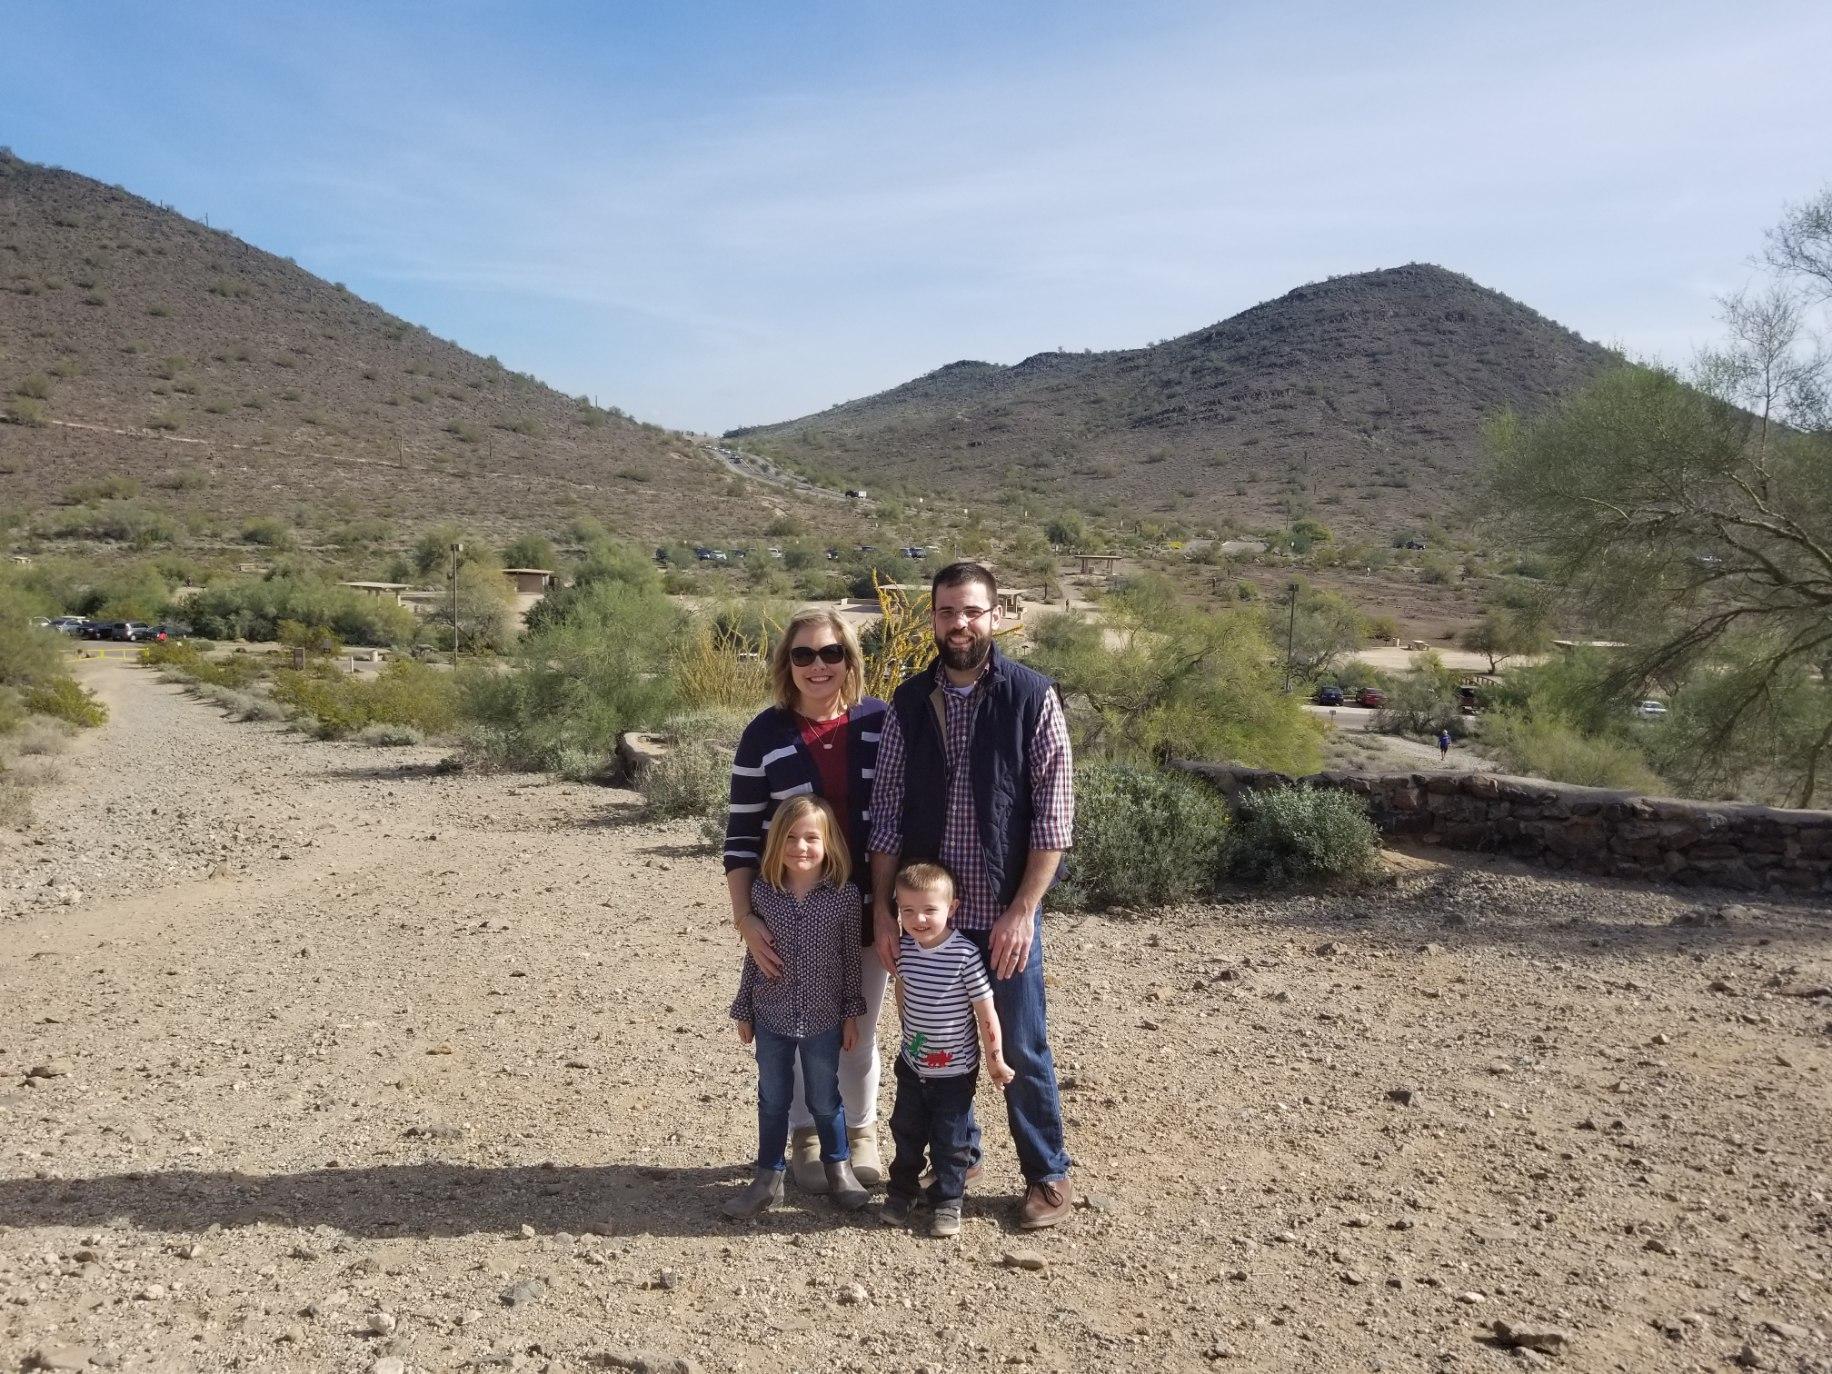 Brittany, Jordan, and the kids are moving to the dessert! We spent Thanksgiving in Arizona